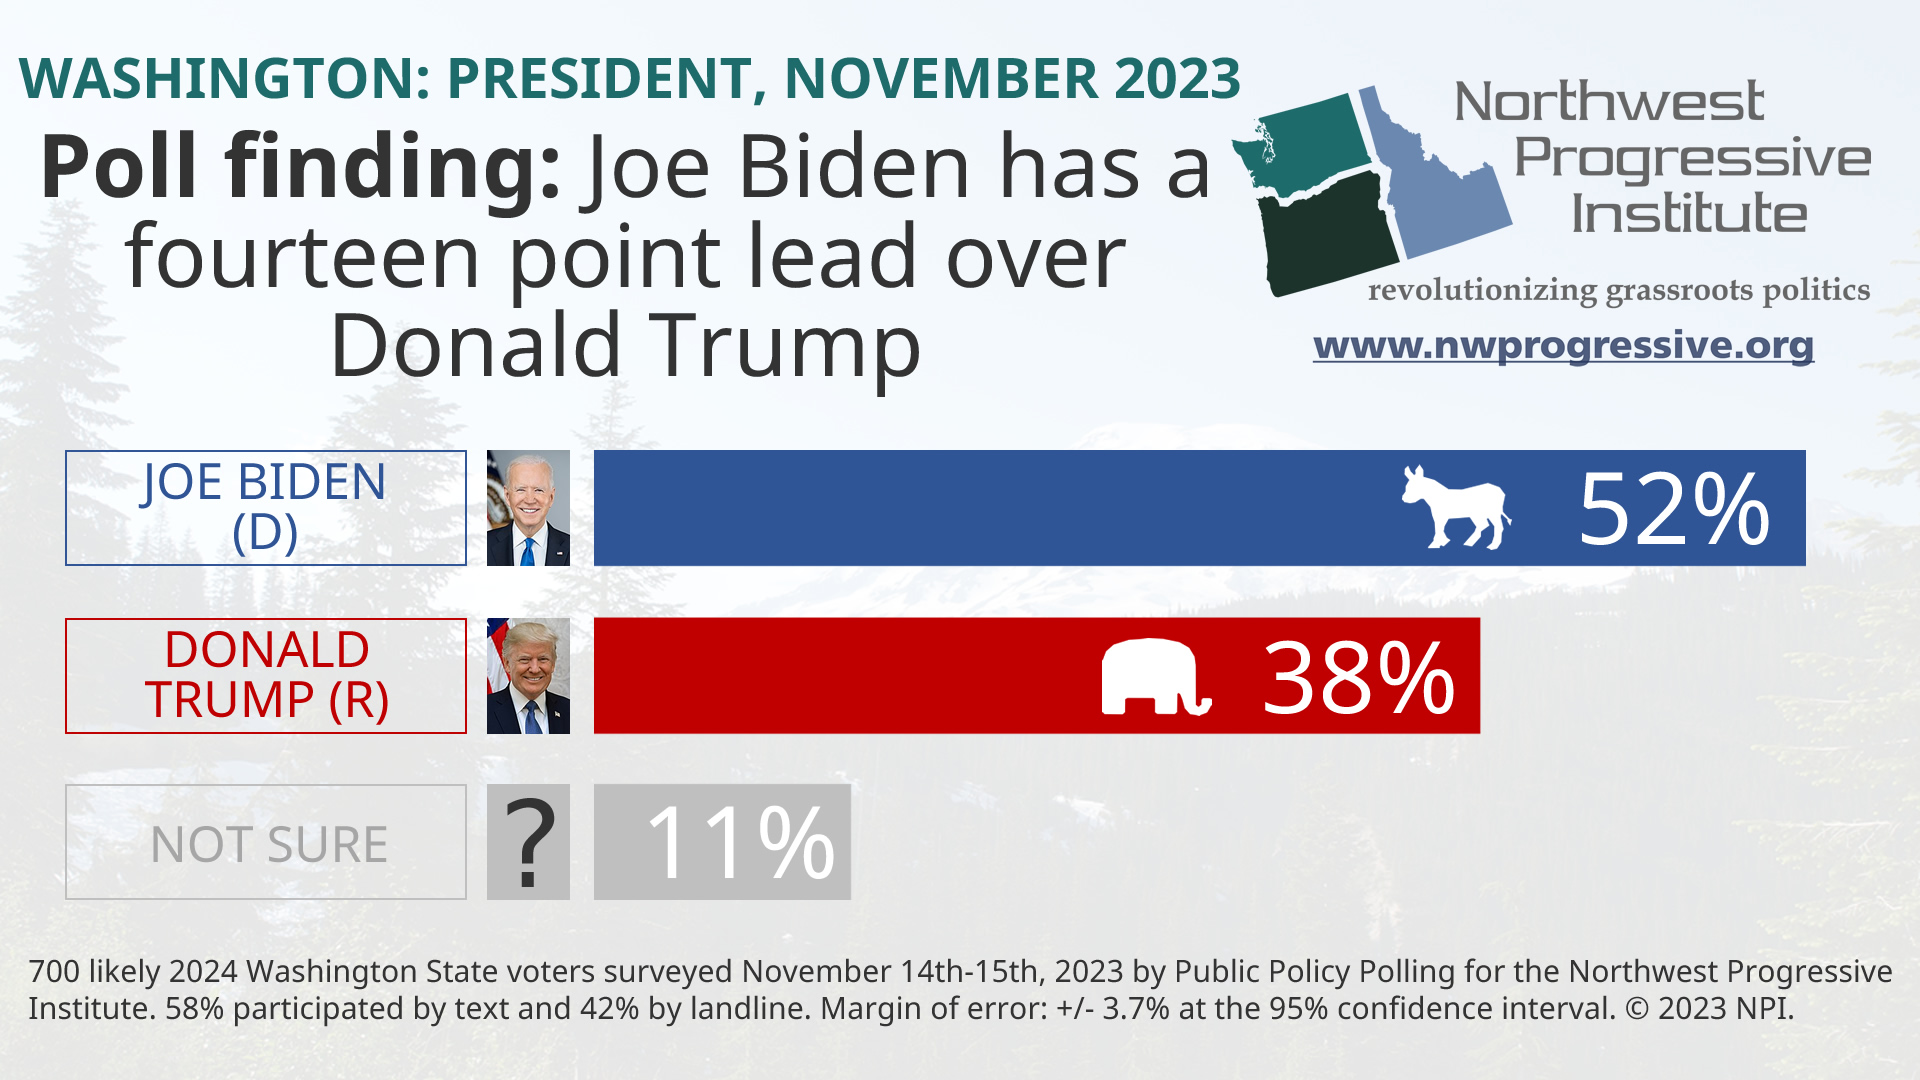 Visualization of NPI's November 2023 presidential poll finding